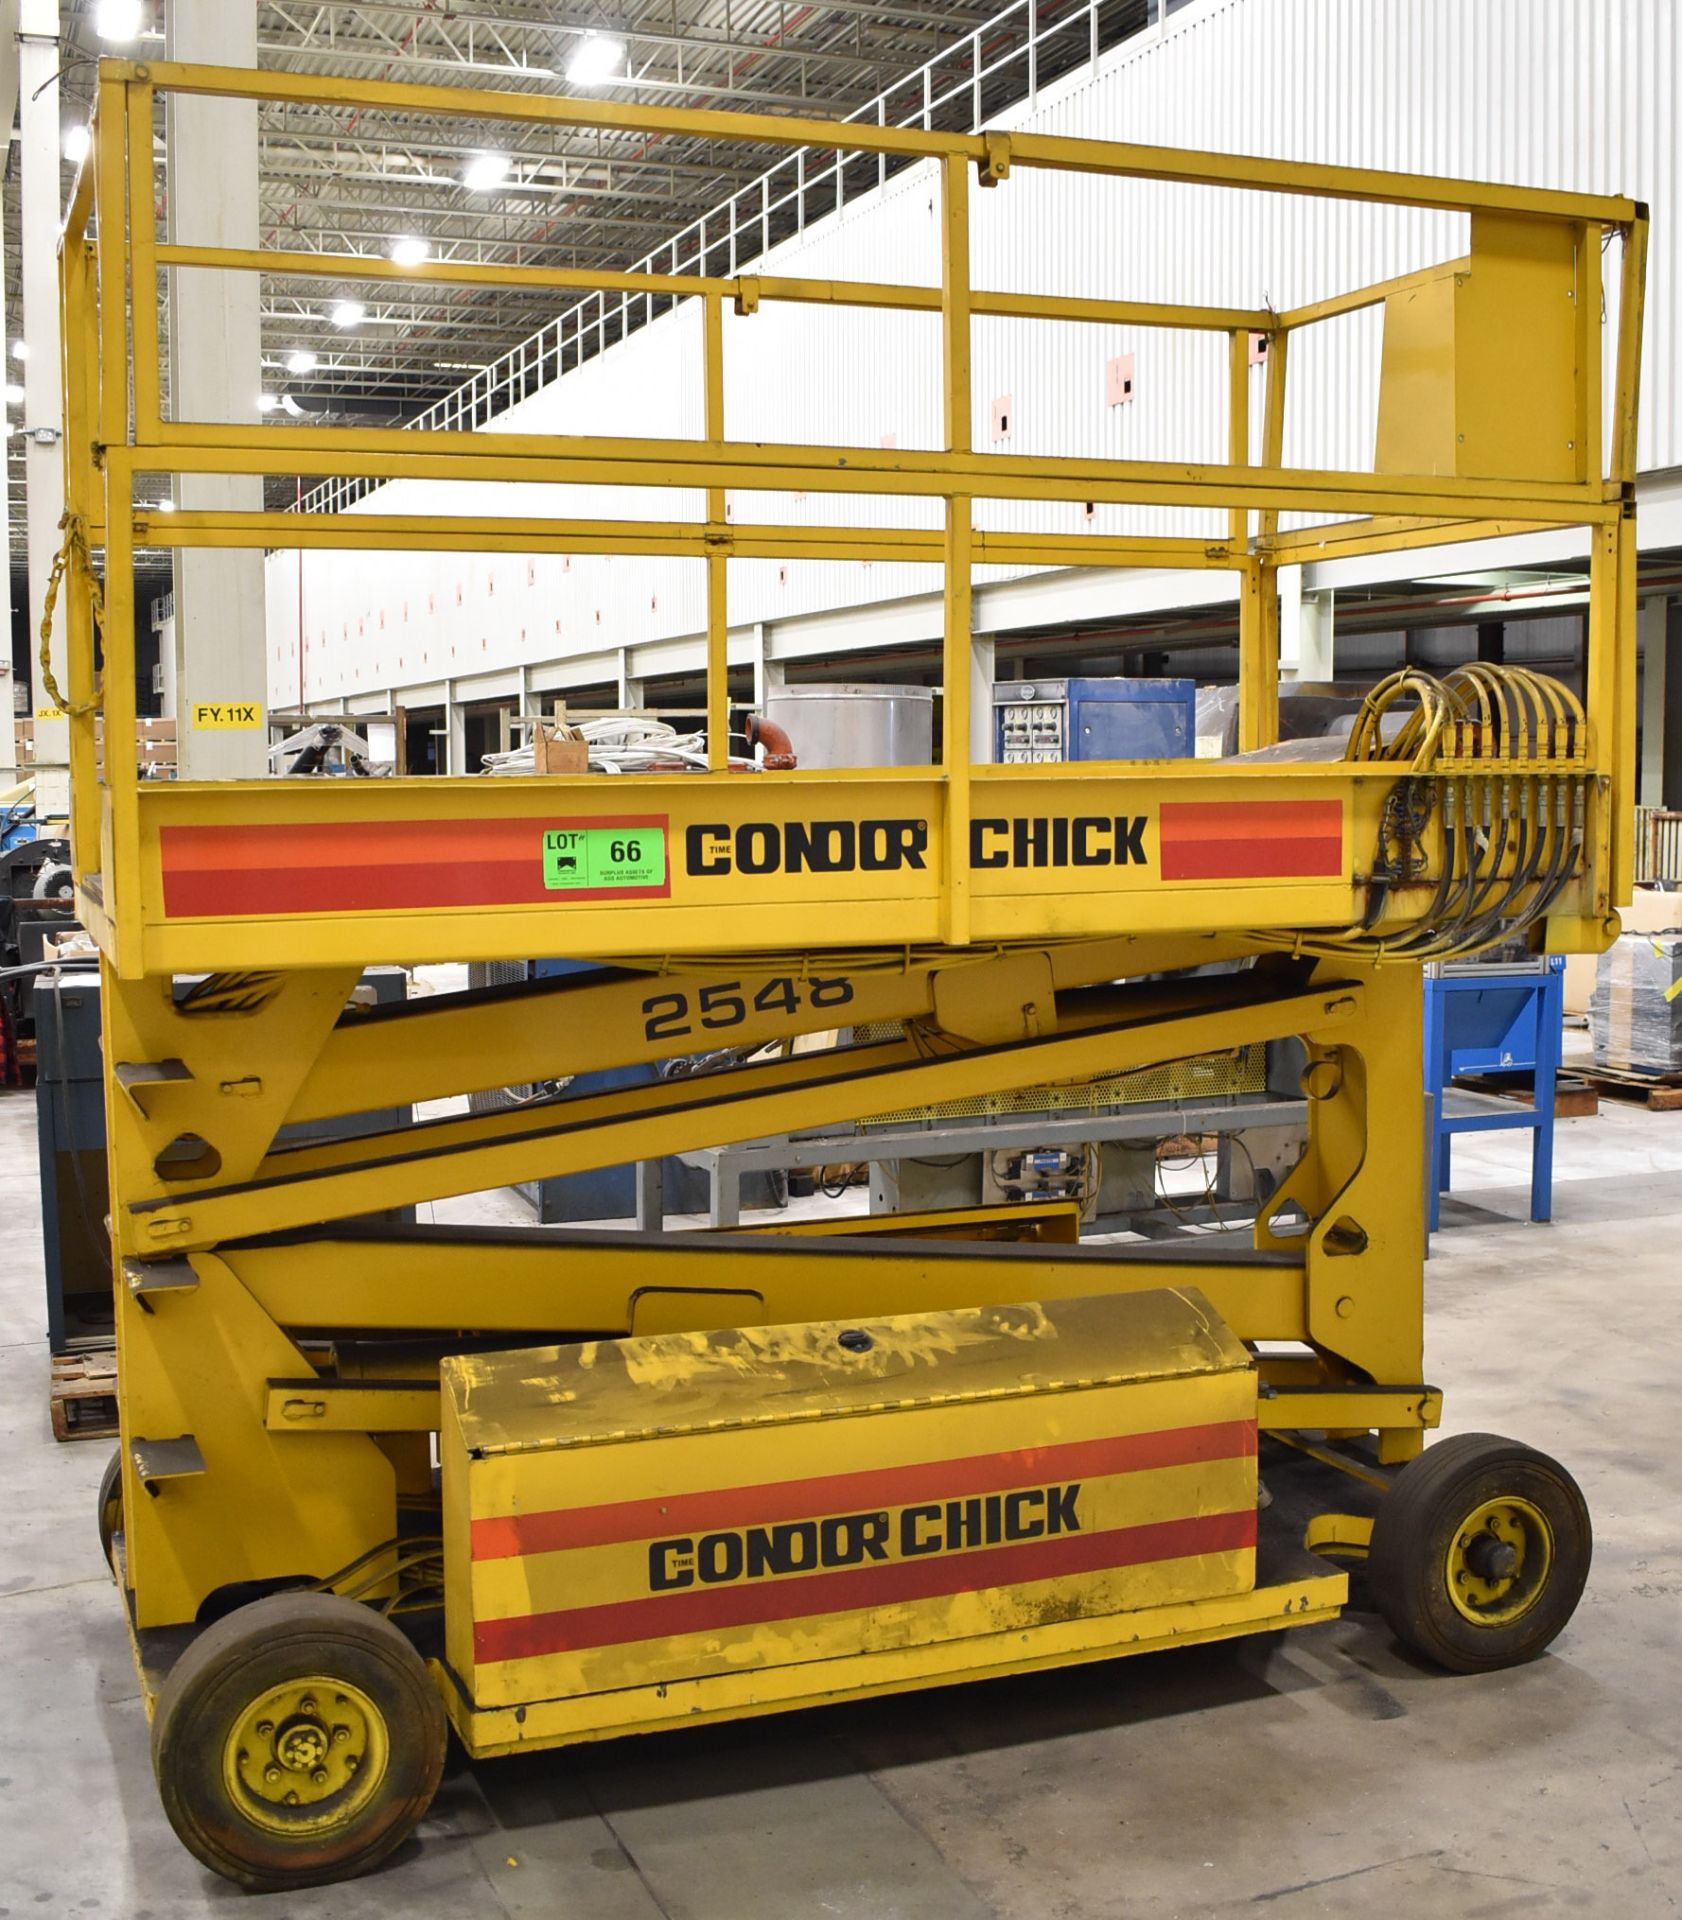 CONDOR 2548 24V ELECTRIC SCISSOR LIFT WITH 1000 LB. CAPACITY, 19.5' MAX. LIFT HEIGHT, ON-BOARD